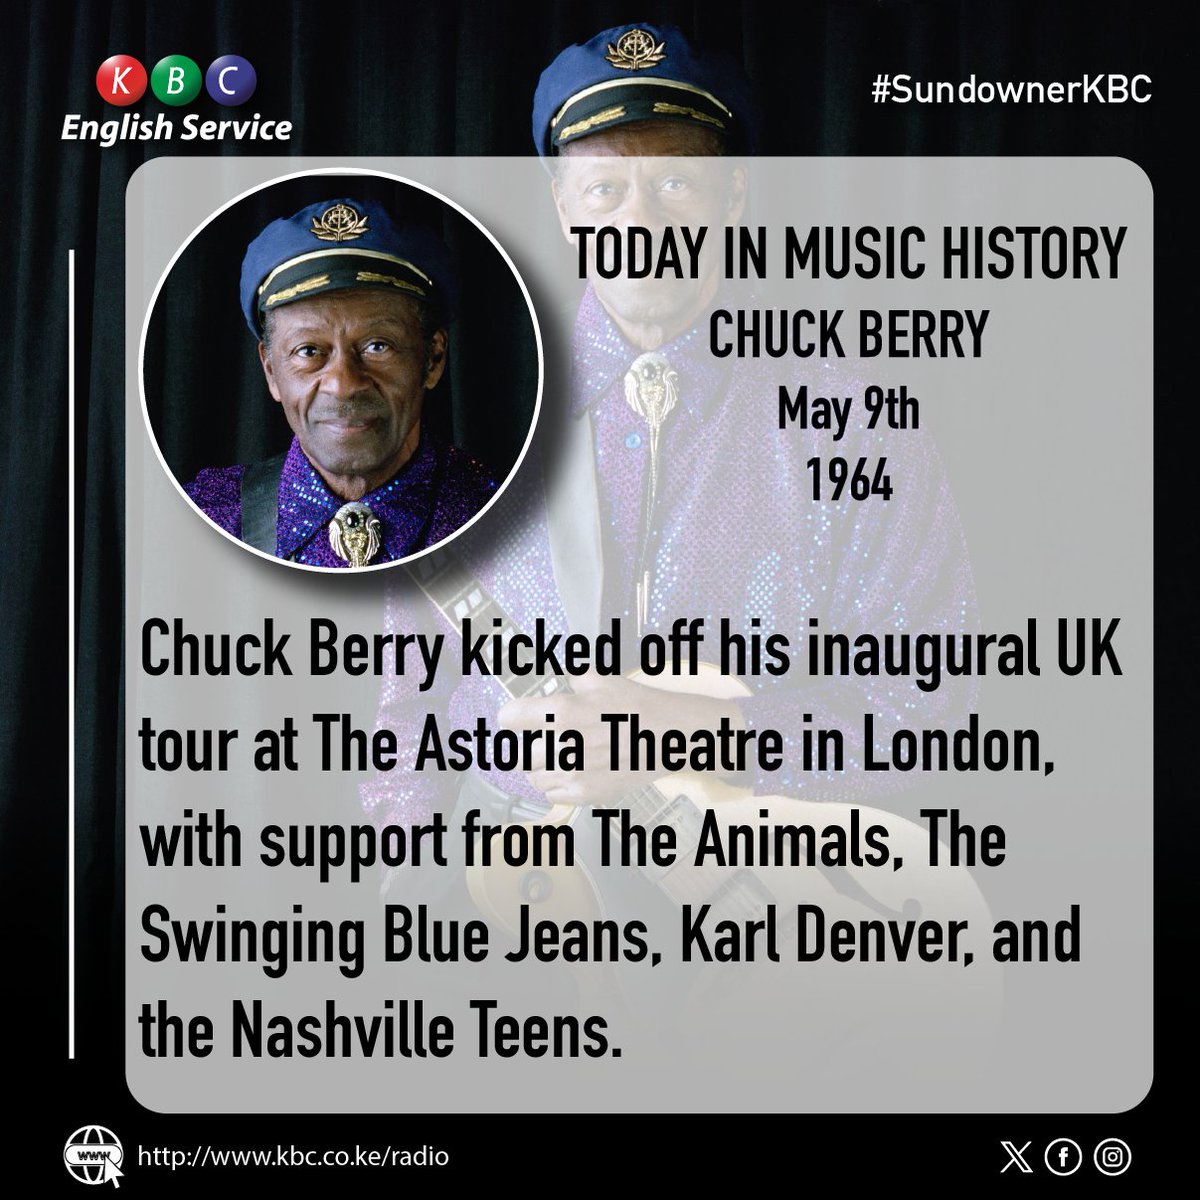 Today in Music History: 9th May 1964 Chuck Berry kicked off his inaugural UK tour at The Astoria Theatre in London, with support from The Animals, The Swinging Blue Jeans, Karl Denver, and the Nashville Teens. ^PMN #SundownerKBC